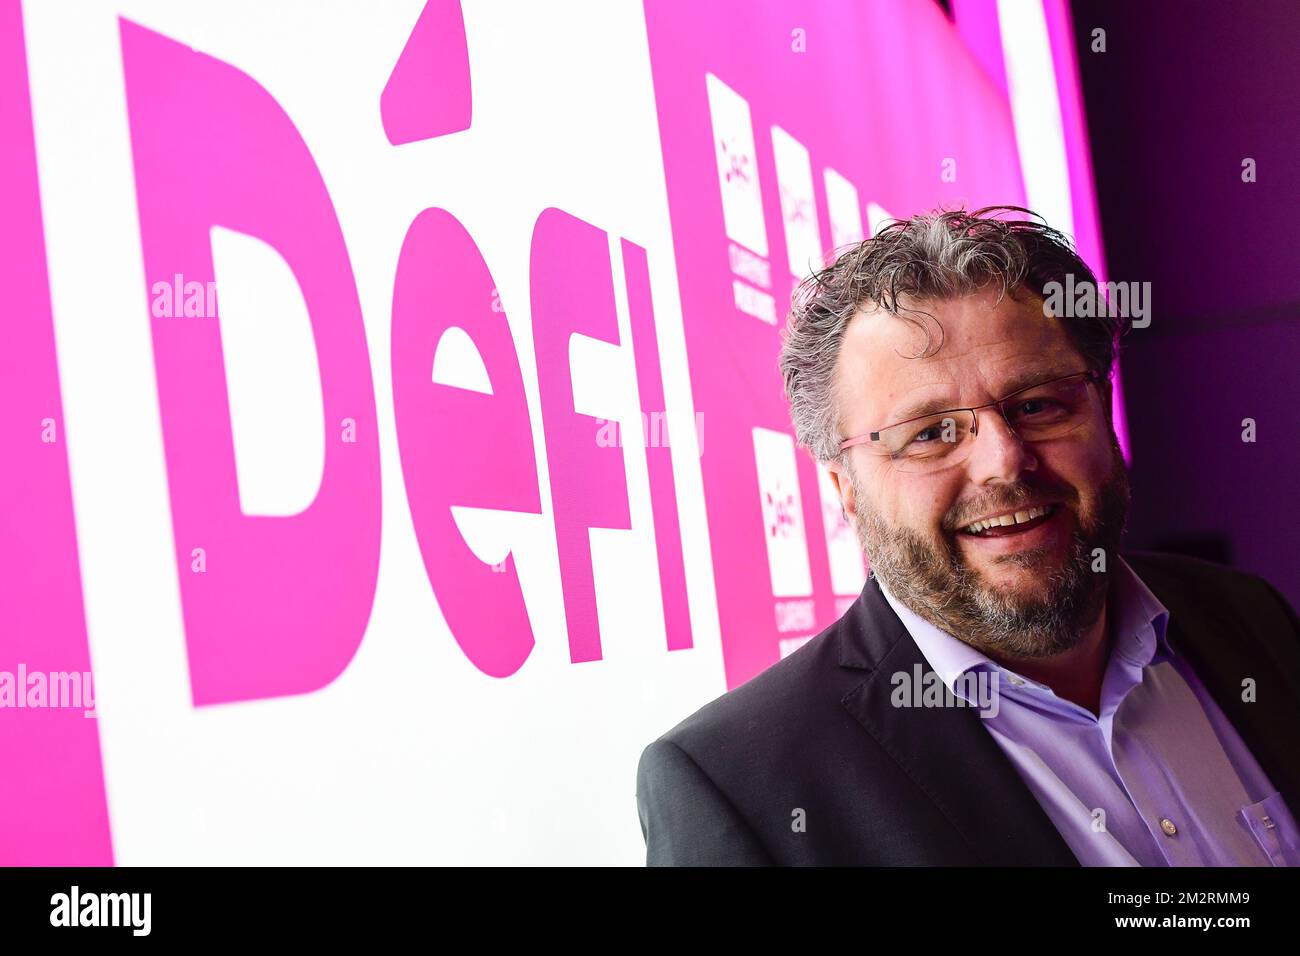 DeFI's Renaud Duquesne poses for the photographer at a press conference of federalist party DeFI to launch the campaign for the upcoming elections, Friday 29 March 2019 in Brussels. BELGA PHOTO LAURIE DIEFFEMBACQ Stock Photo